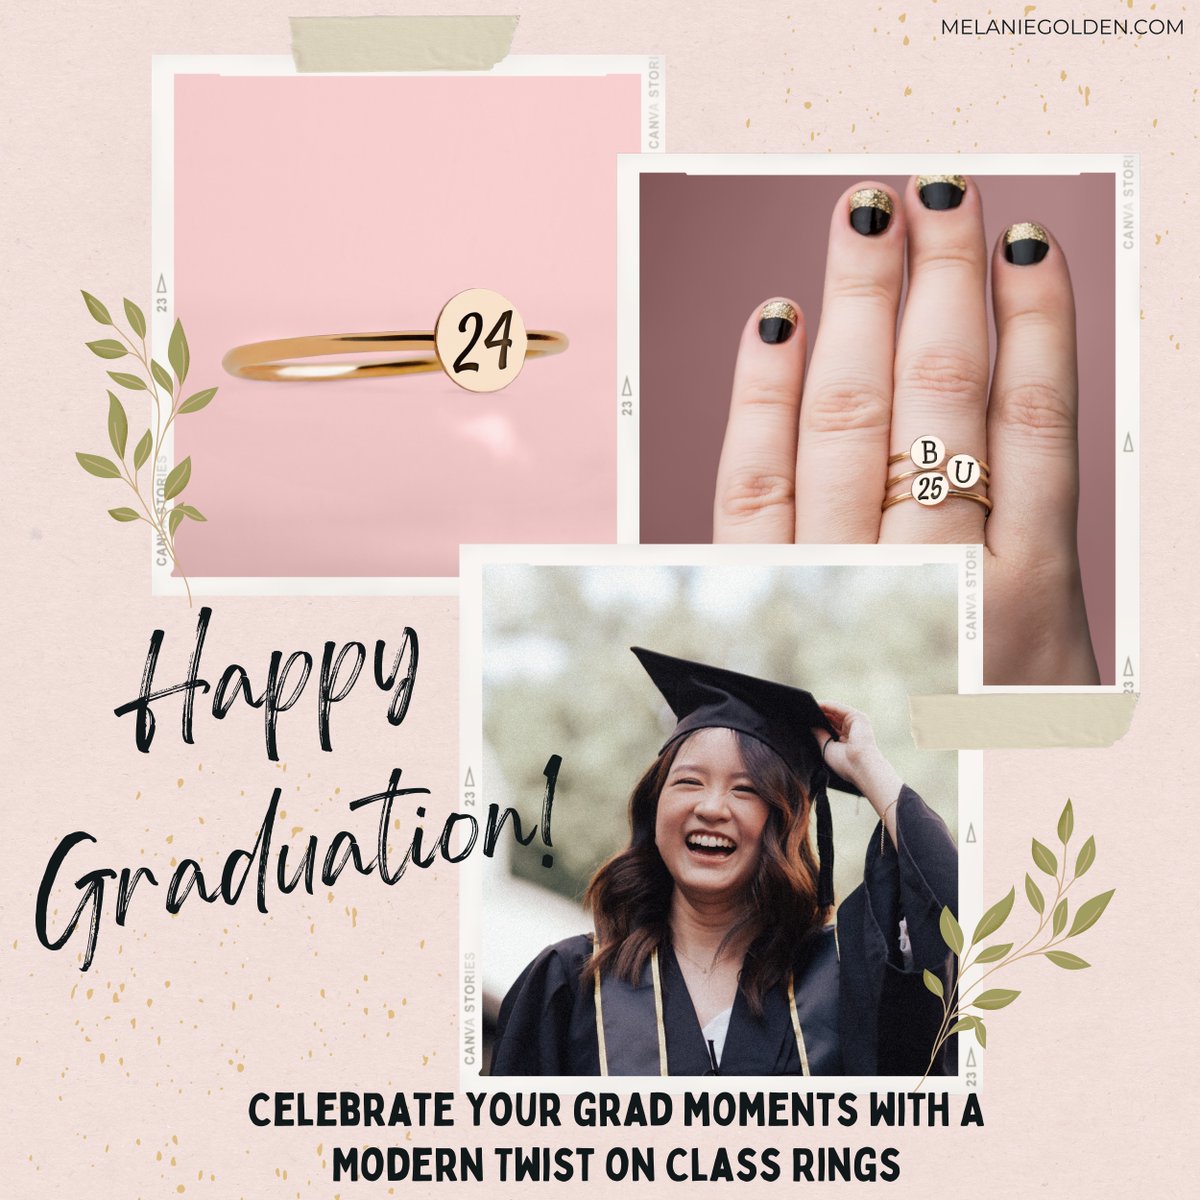 🎓✨ Honor your hard work with a modern twist on tradition! Our class rings are the perfect way to celebrate your graduation in style. 🌟🎉 #GraduationGoals #ClassOf2024 #classof2025 #graduationseason #classrings  #ProudGraduate #Graduation2024 #ClassRingDesign #grad #gradgoals